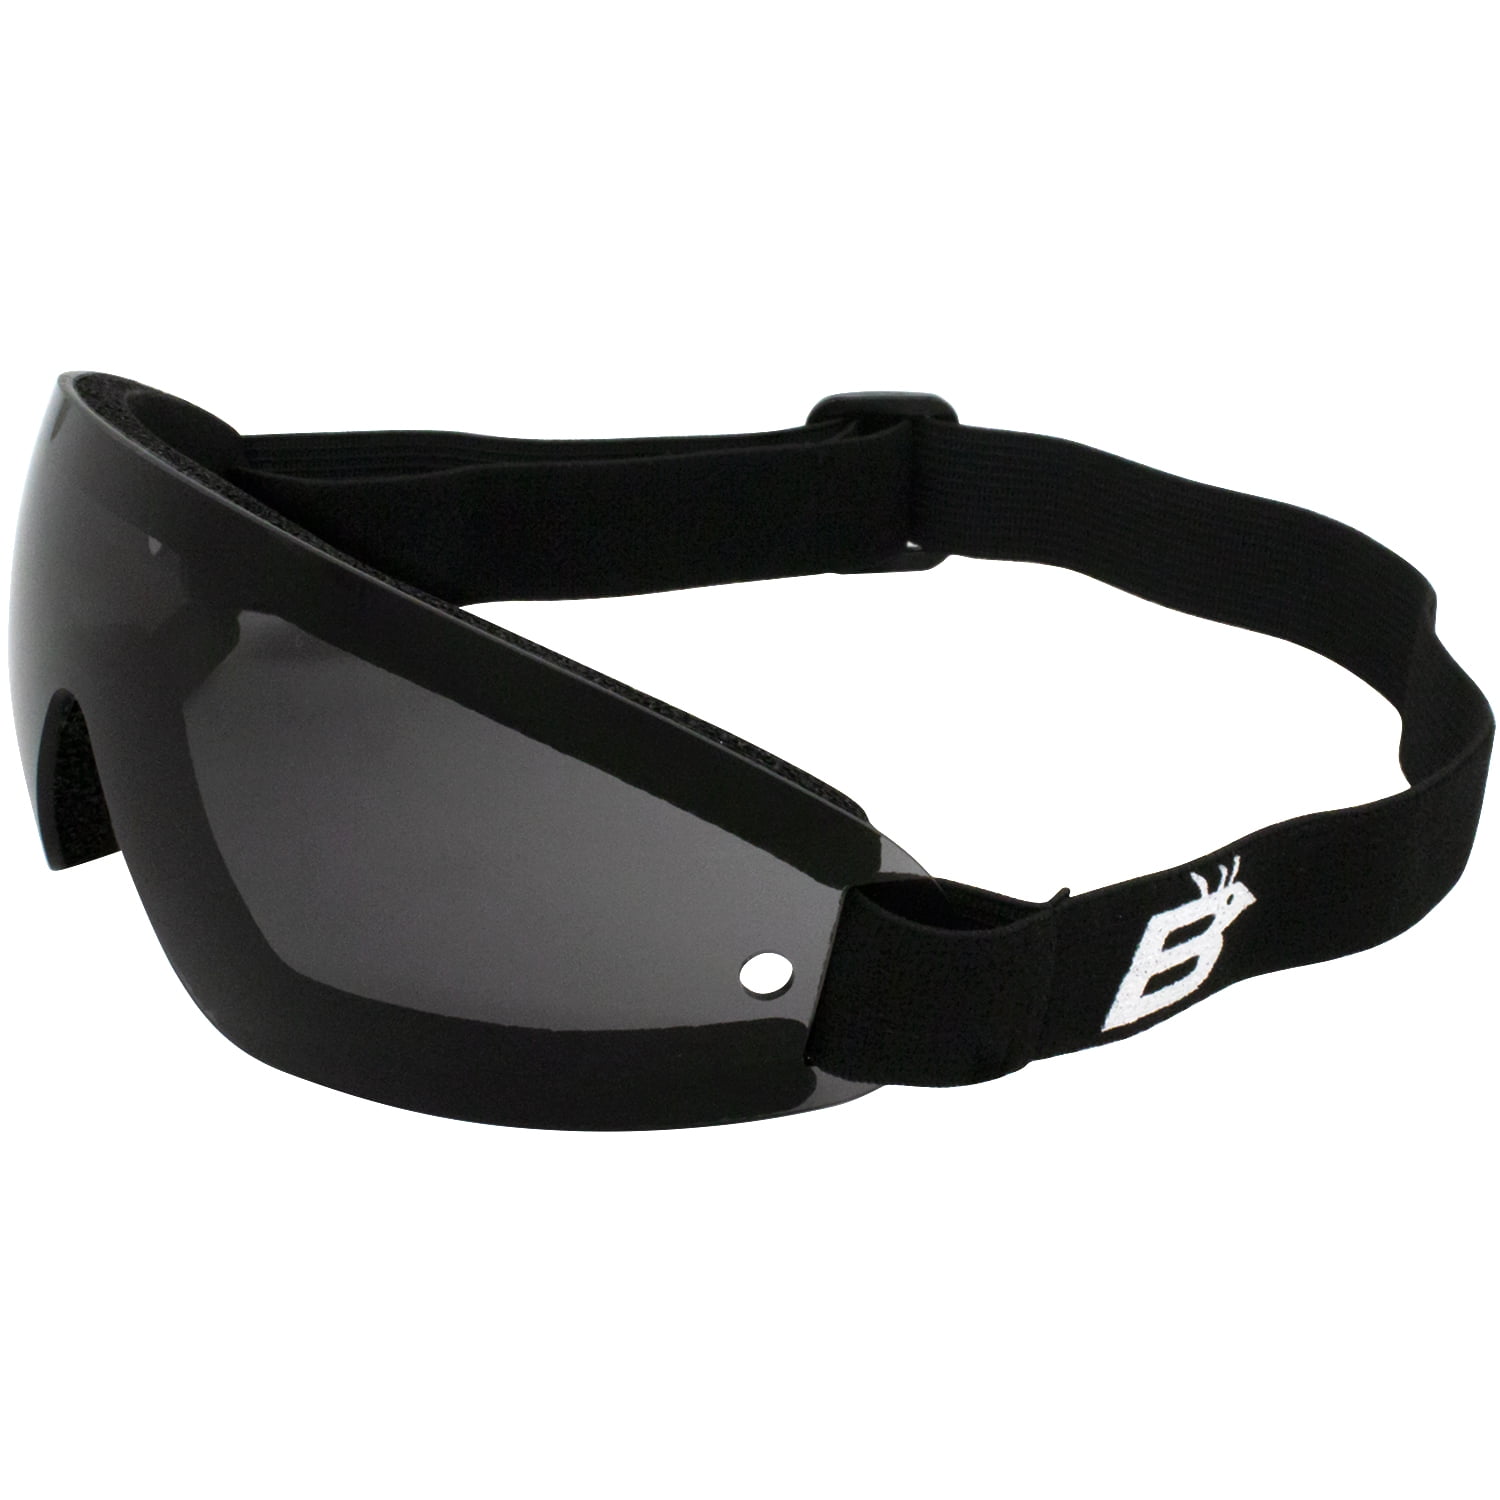 Birdz Wing Skydive Sky Diving Goggles Clear Lens UV400 